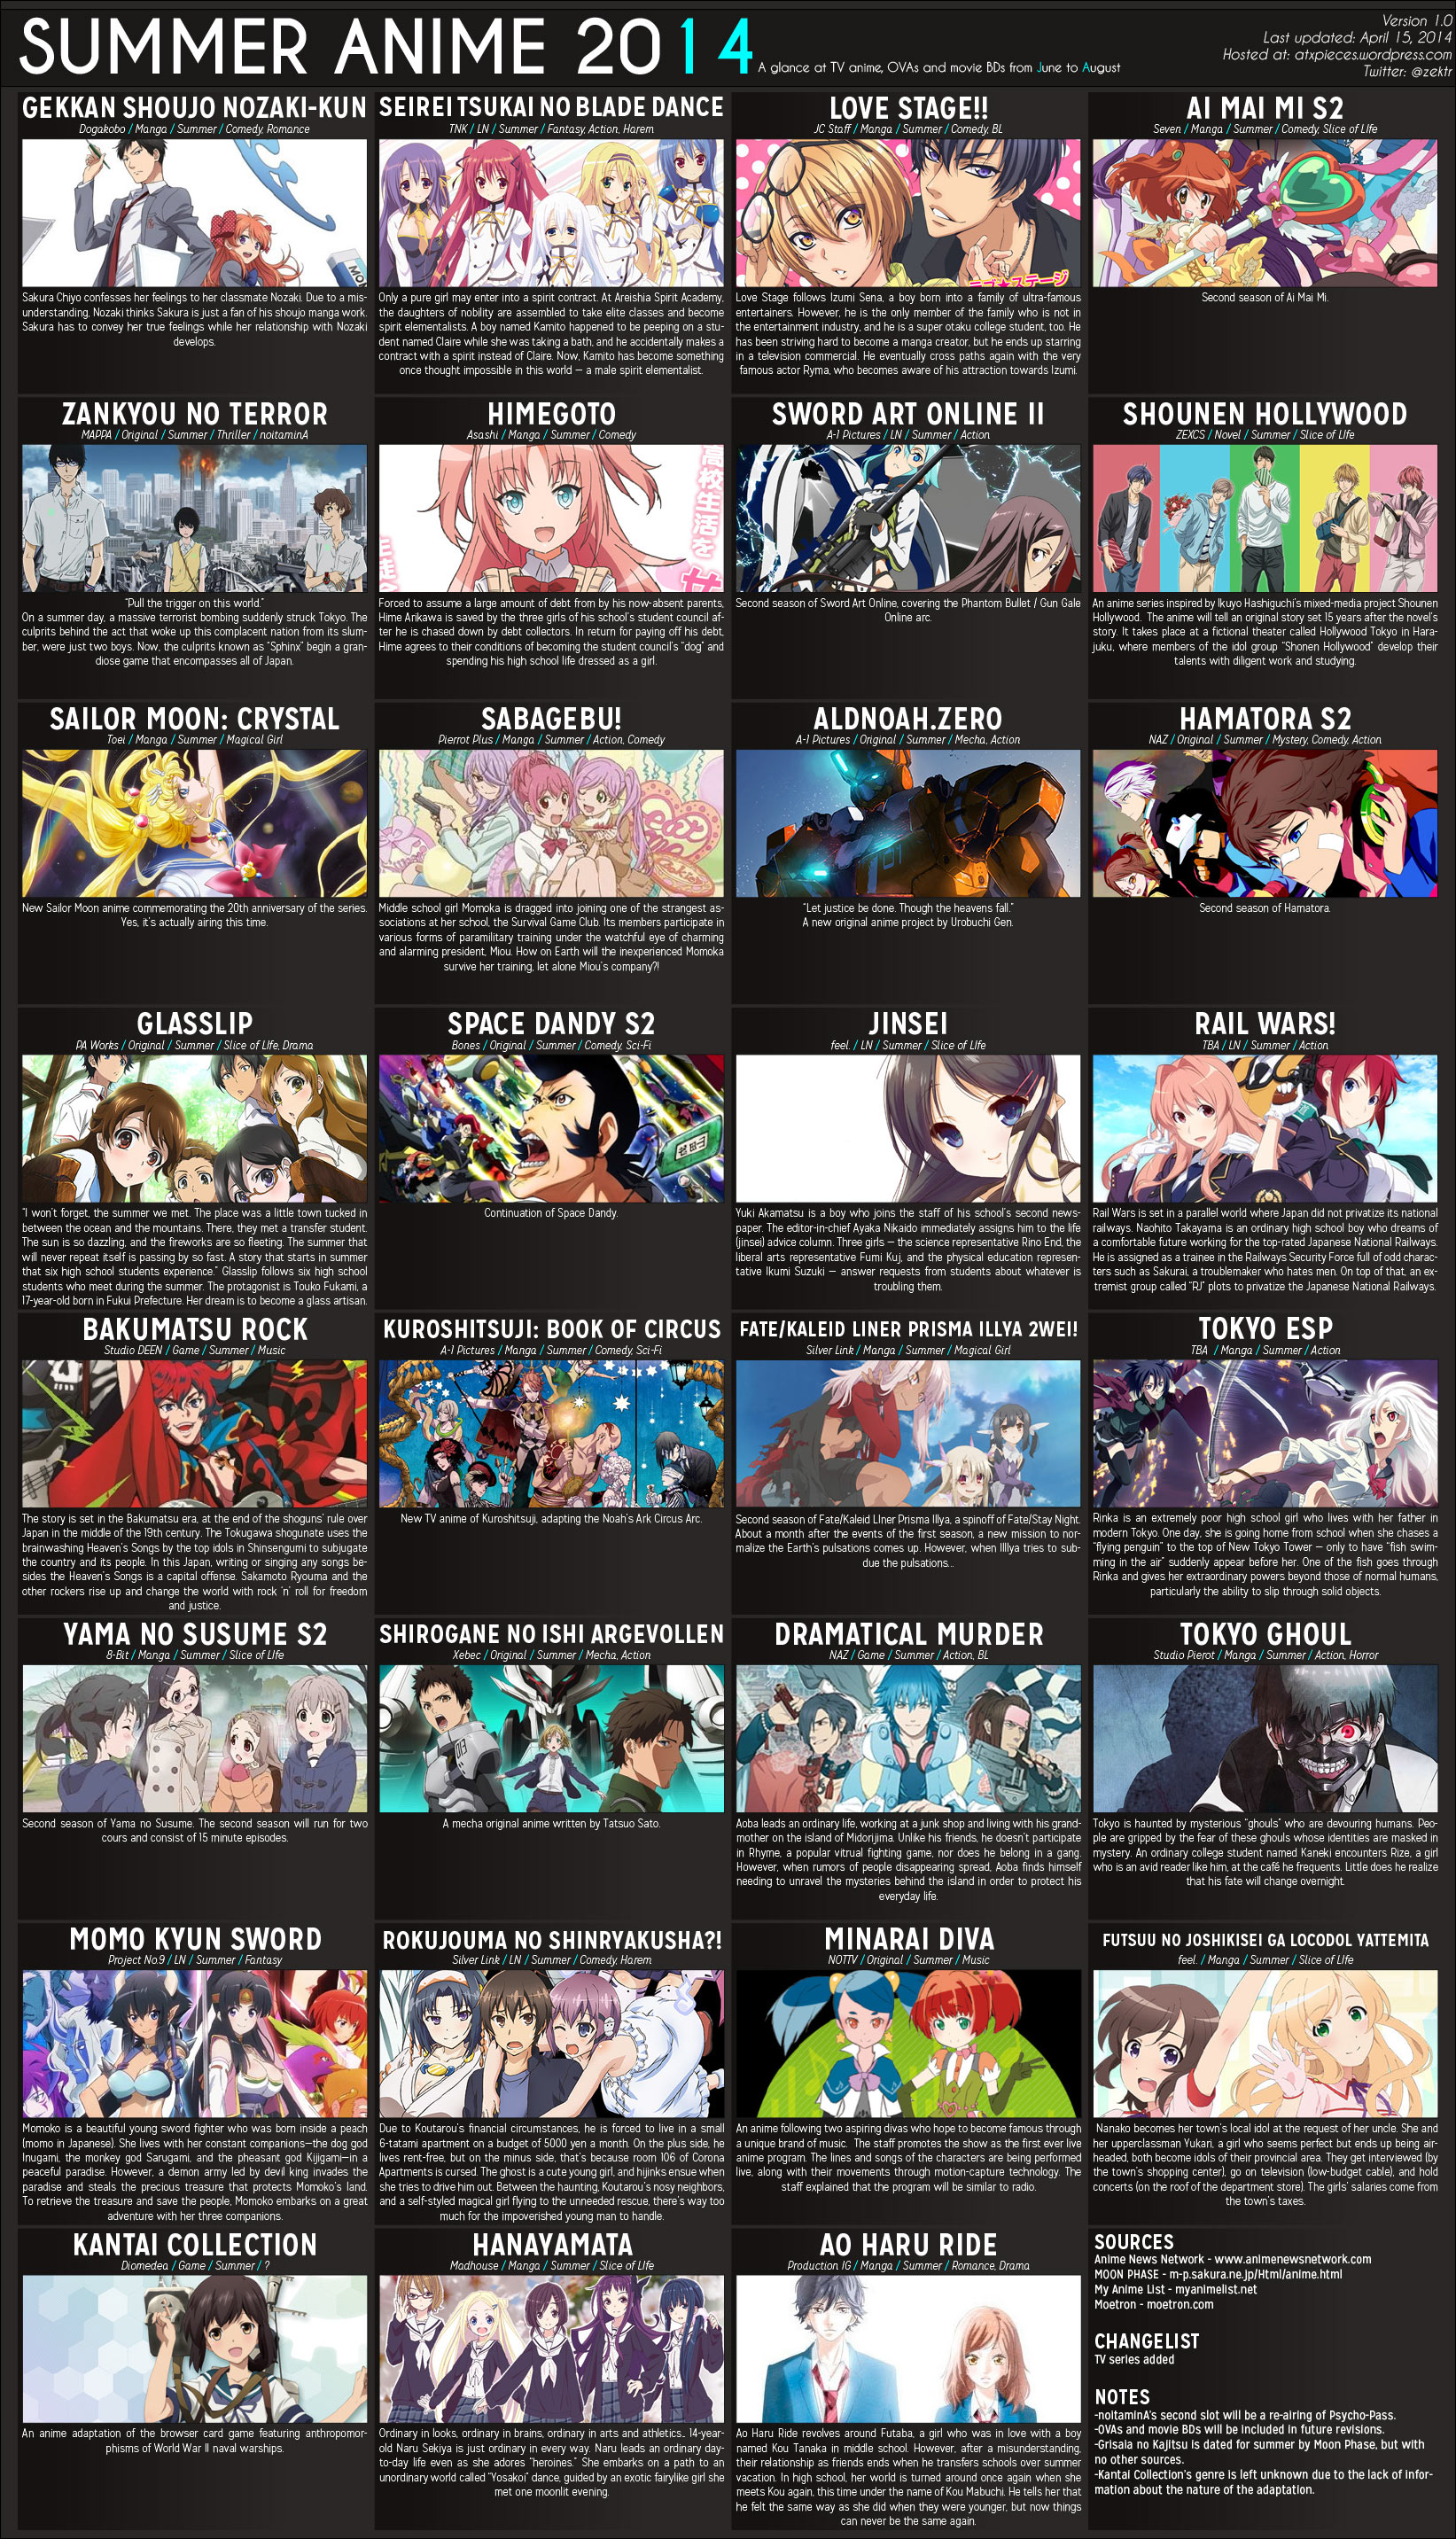 Summer Anime 2014 Chart V1.0 [Atxpieces]